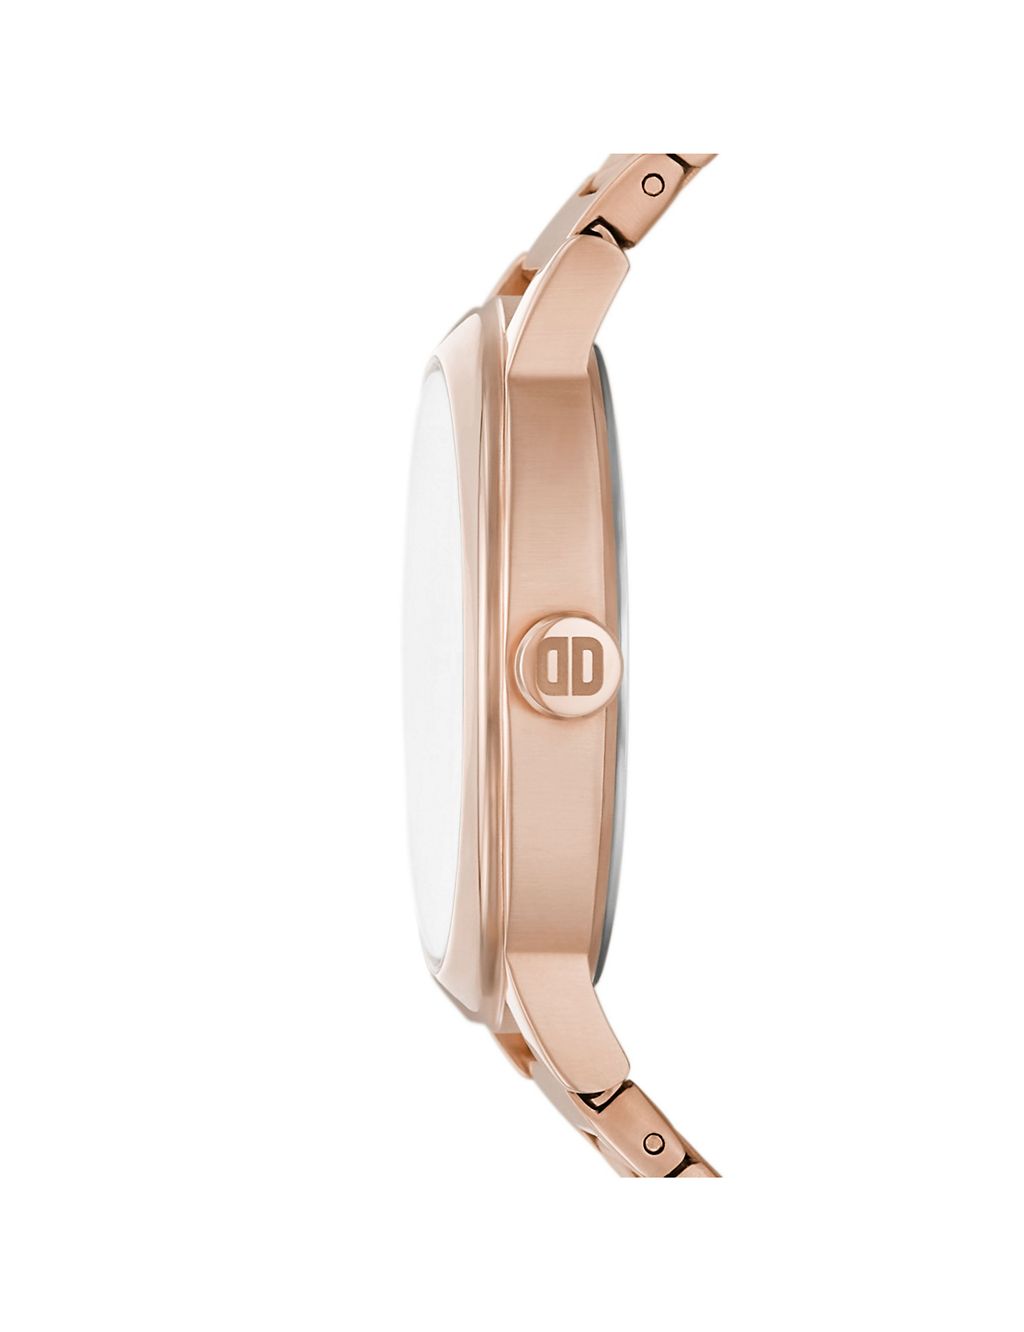 DKNY 7th Avenue Rose Gold Stainless Steel Watch 1 of 6